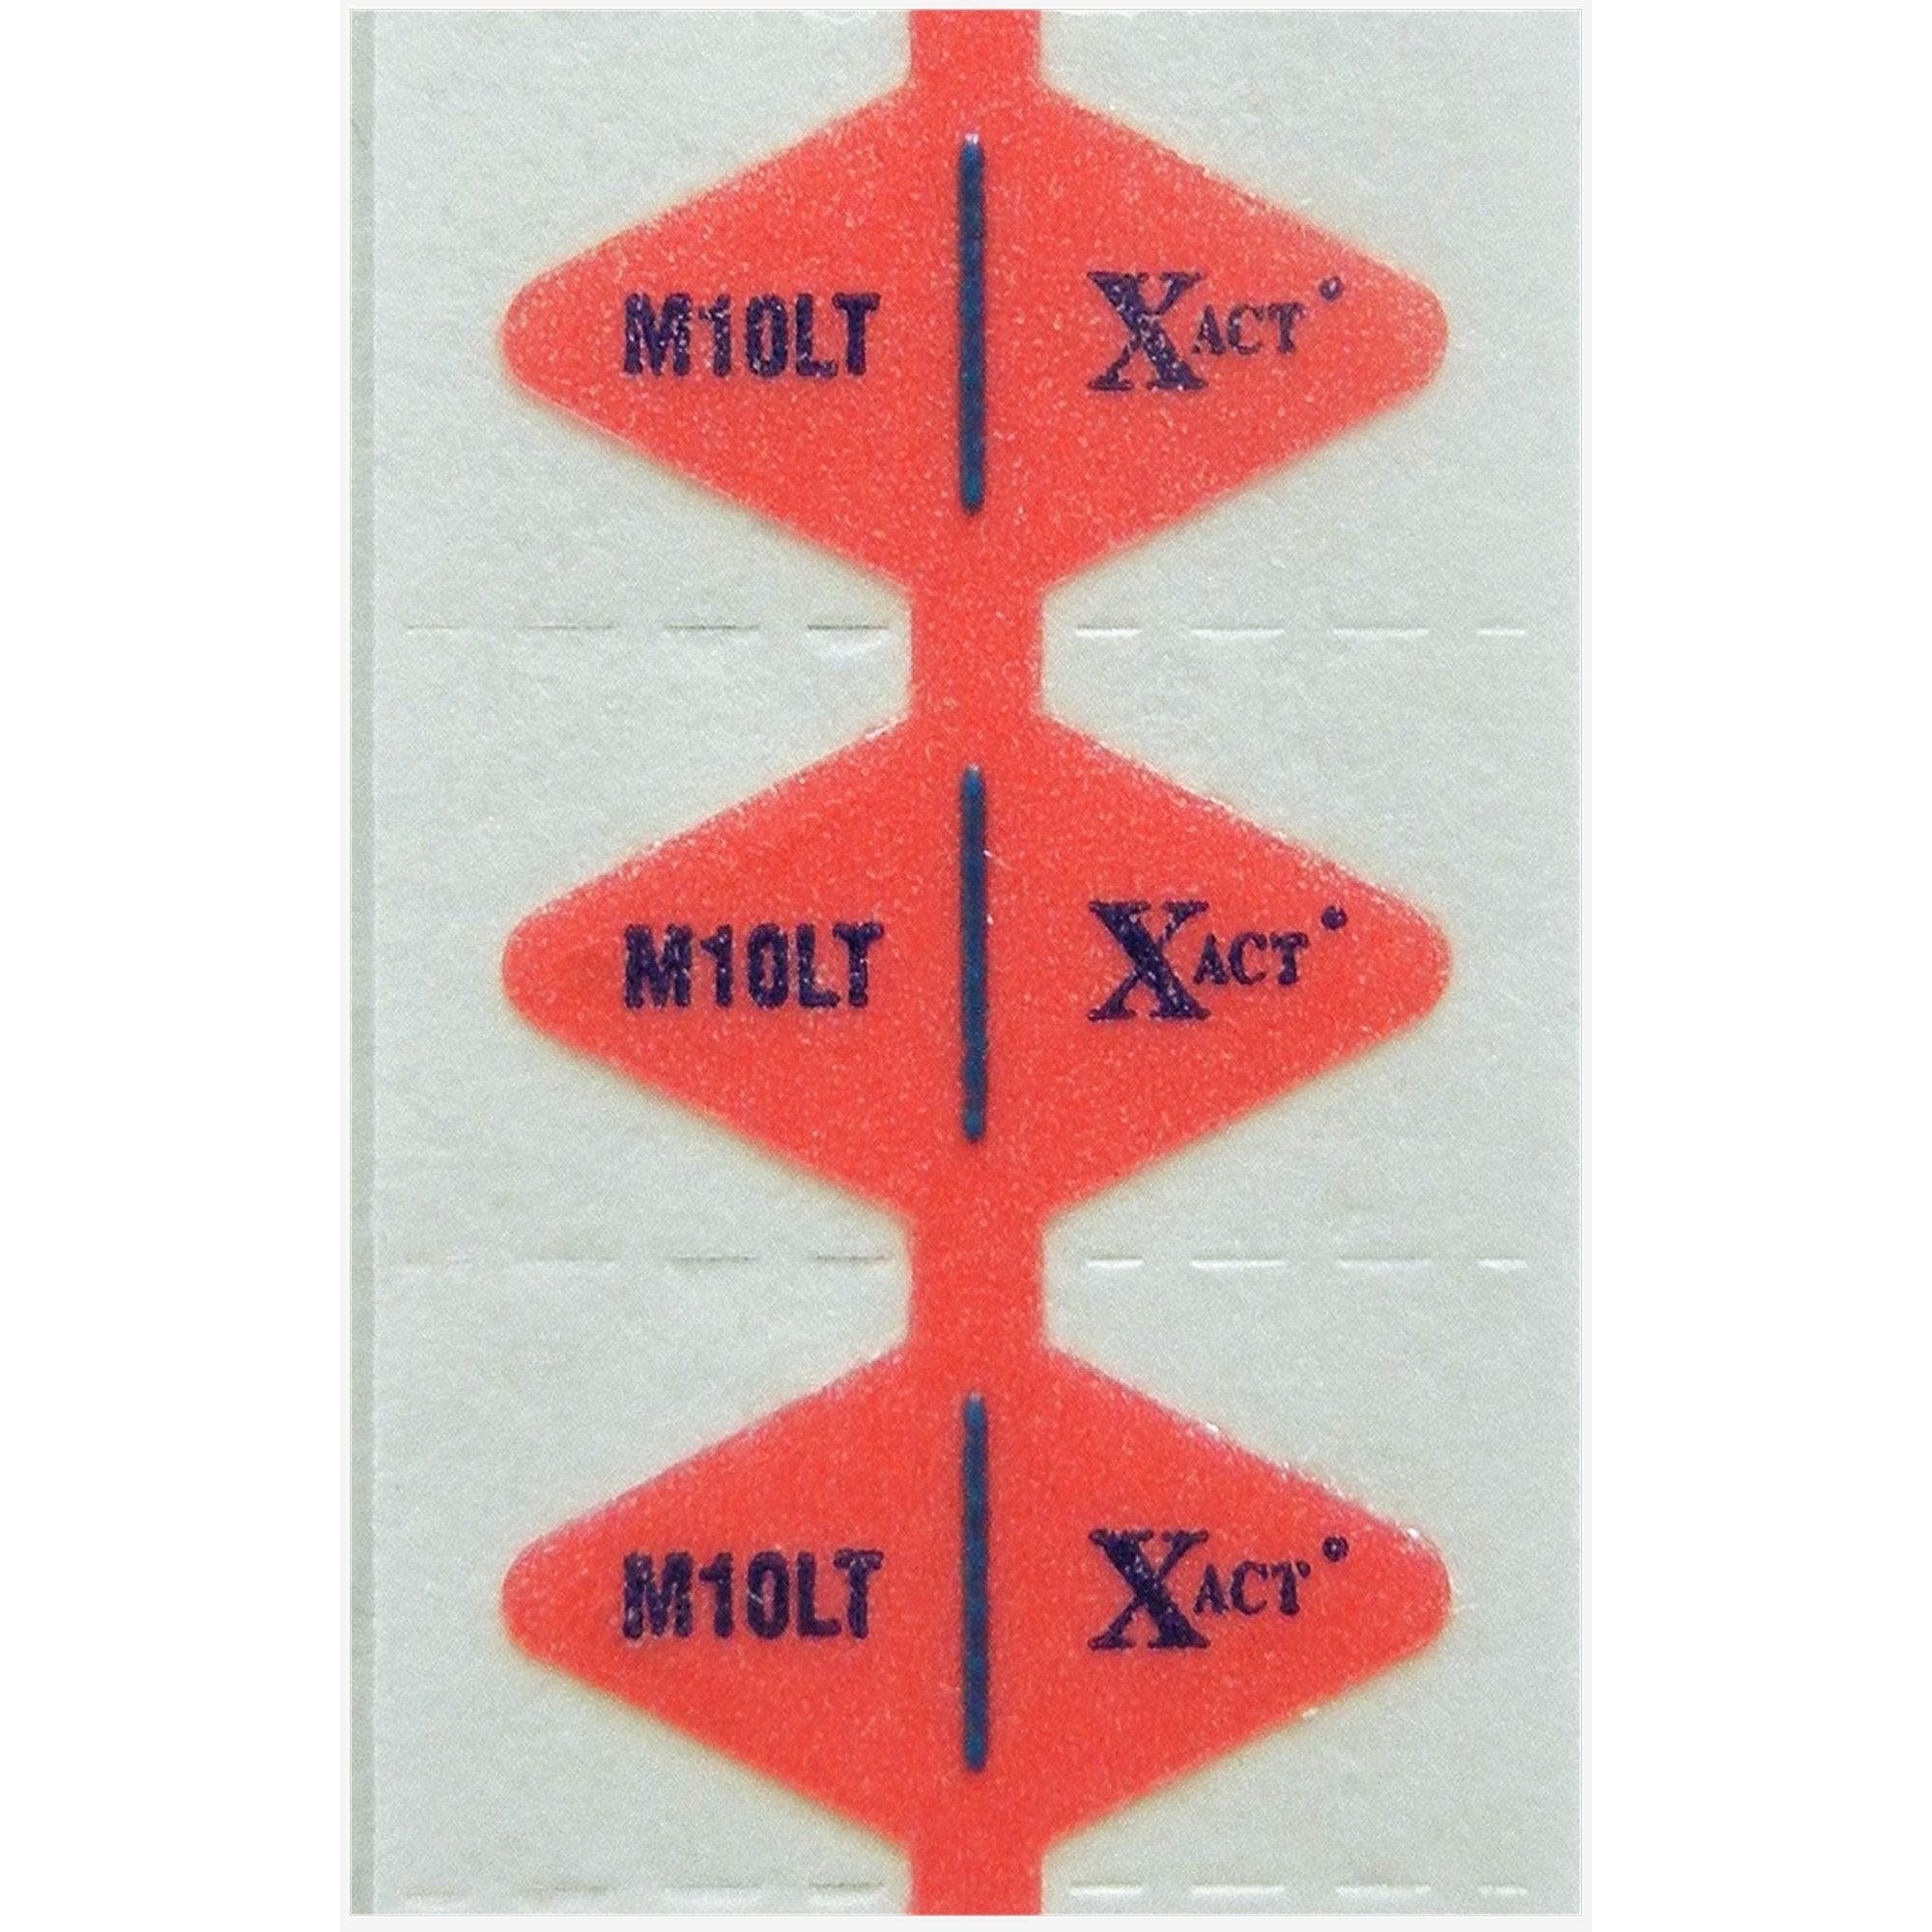 Mammography Tomosynthesis Scar Marker Xact Plastic with 1 cm Perforations